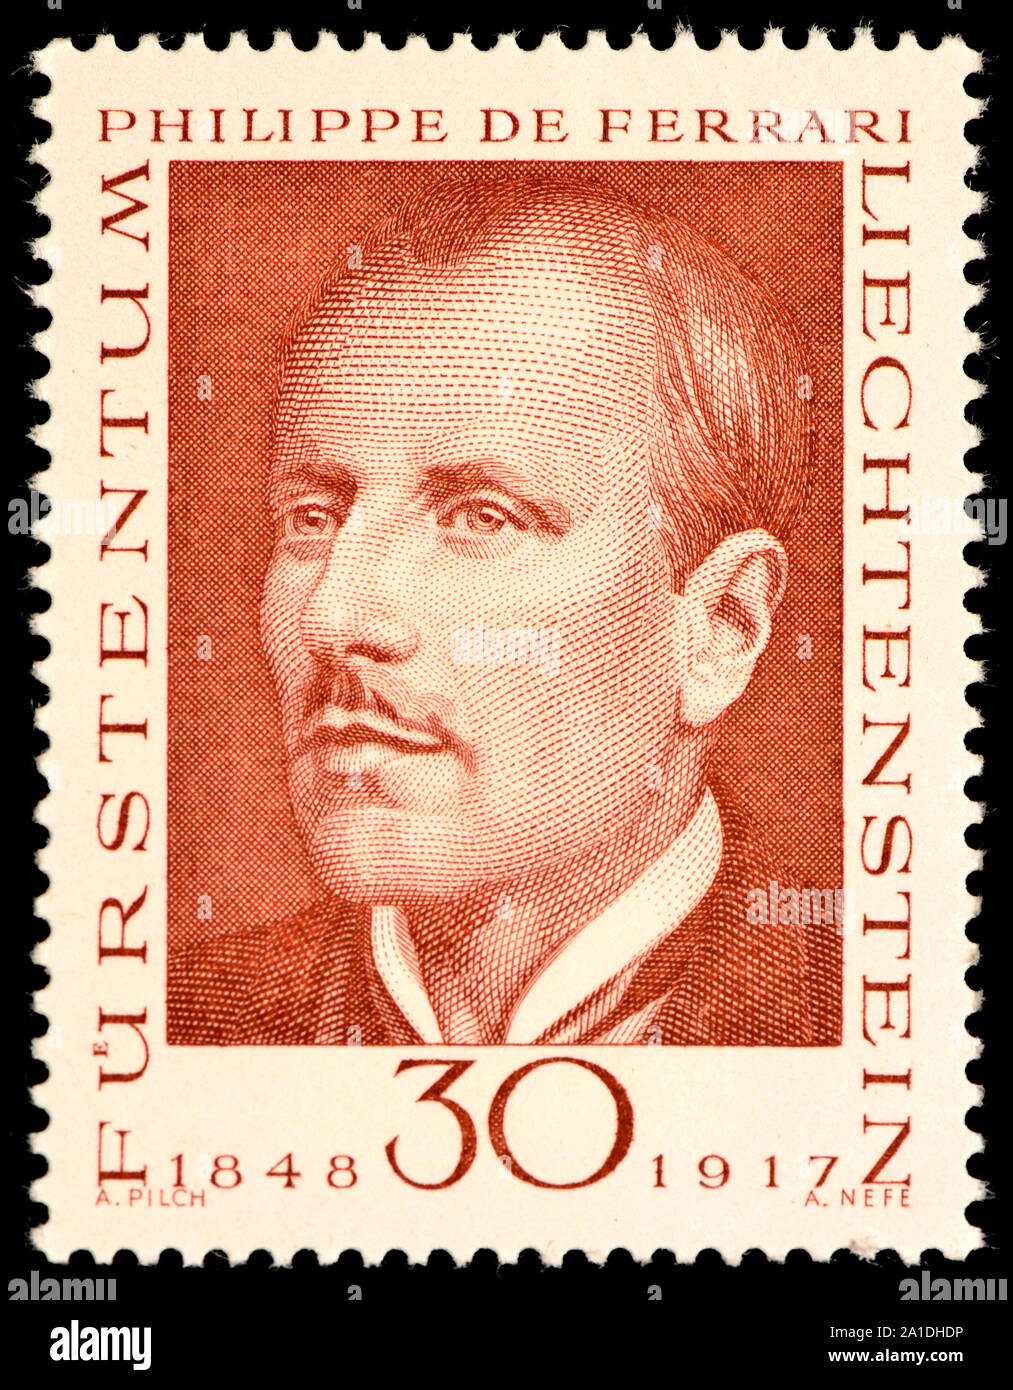 Liechtenstein postage stamp (1968) : Philippe de Ferrari (1848-1917) Philatelist credited with the most complete stamp collection in history Stock Photo